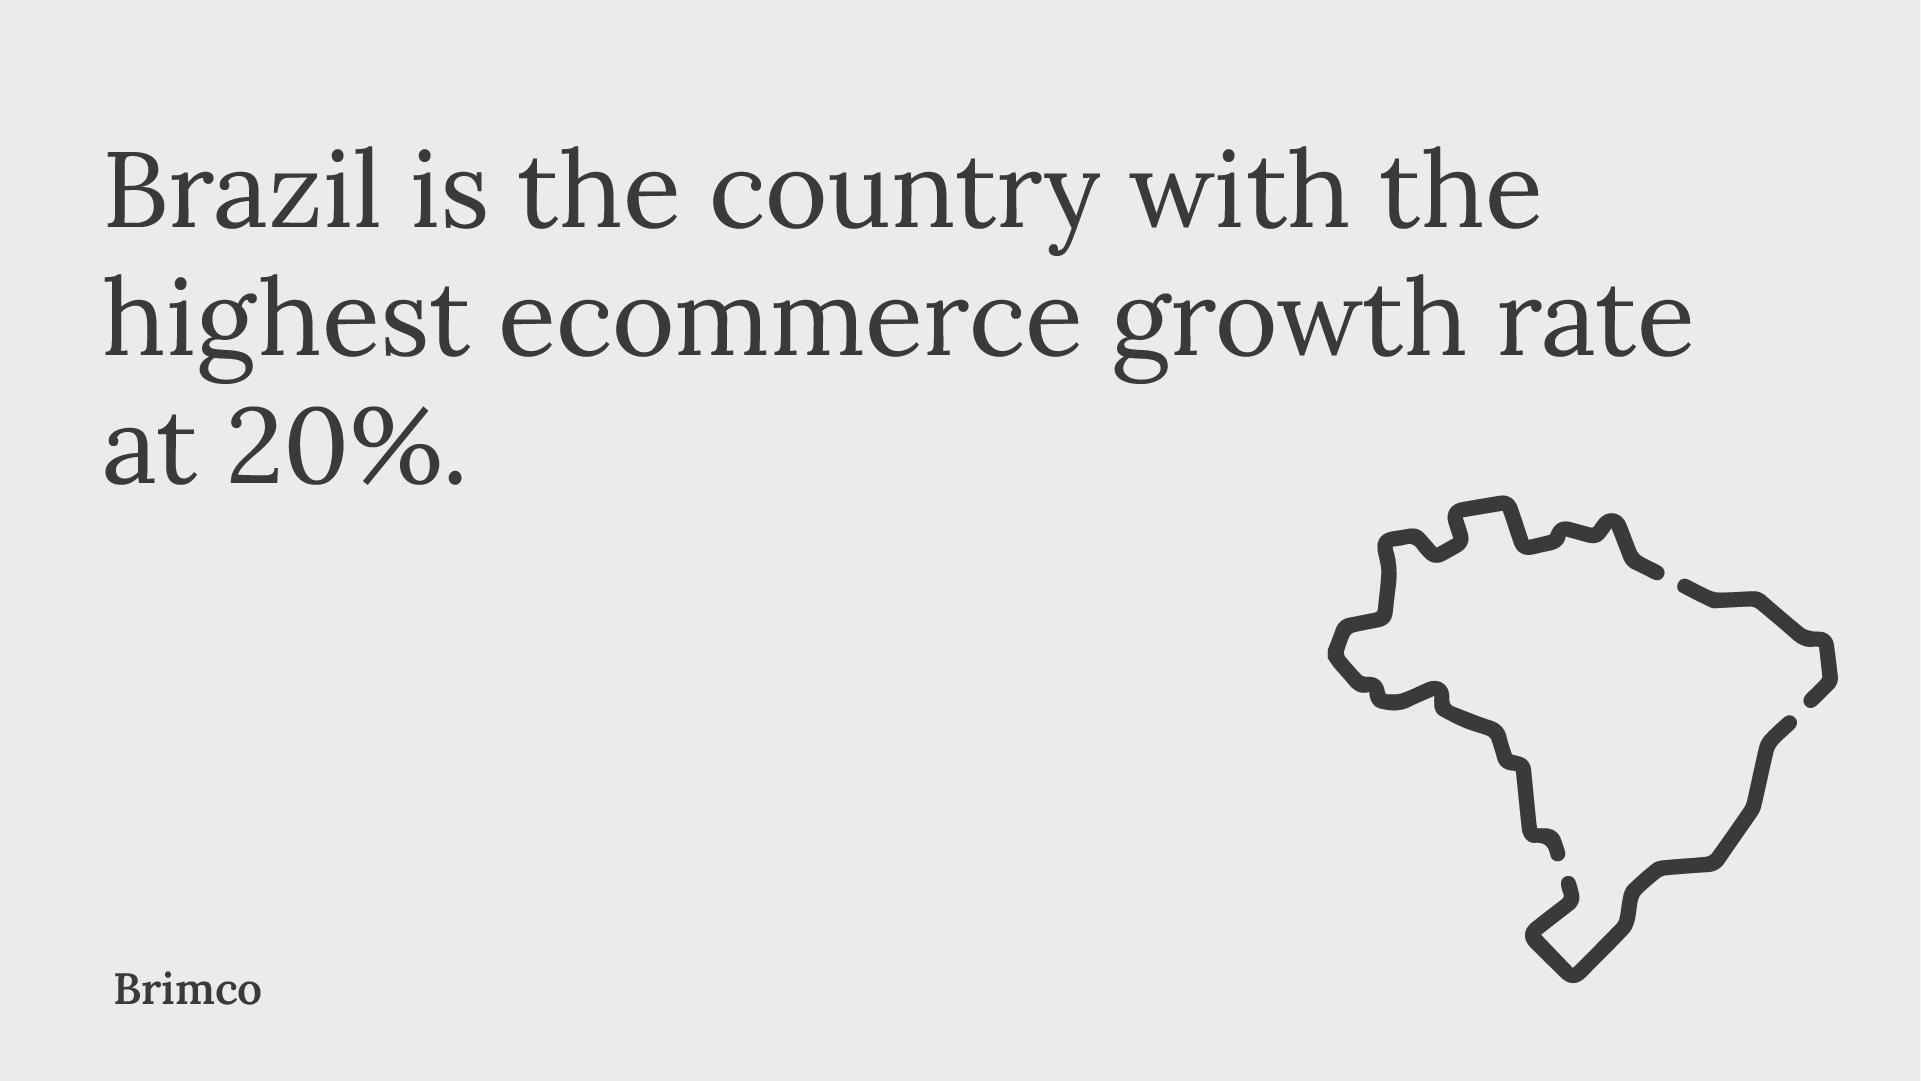 Brazil is the country with the highest ecommerce growth